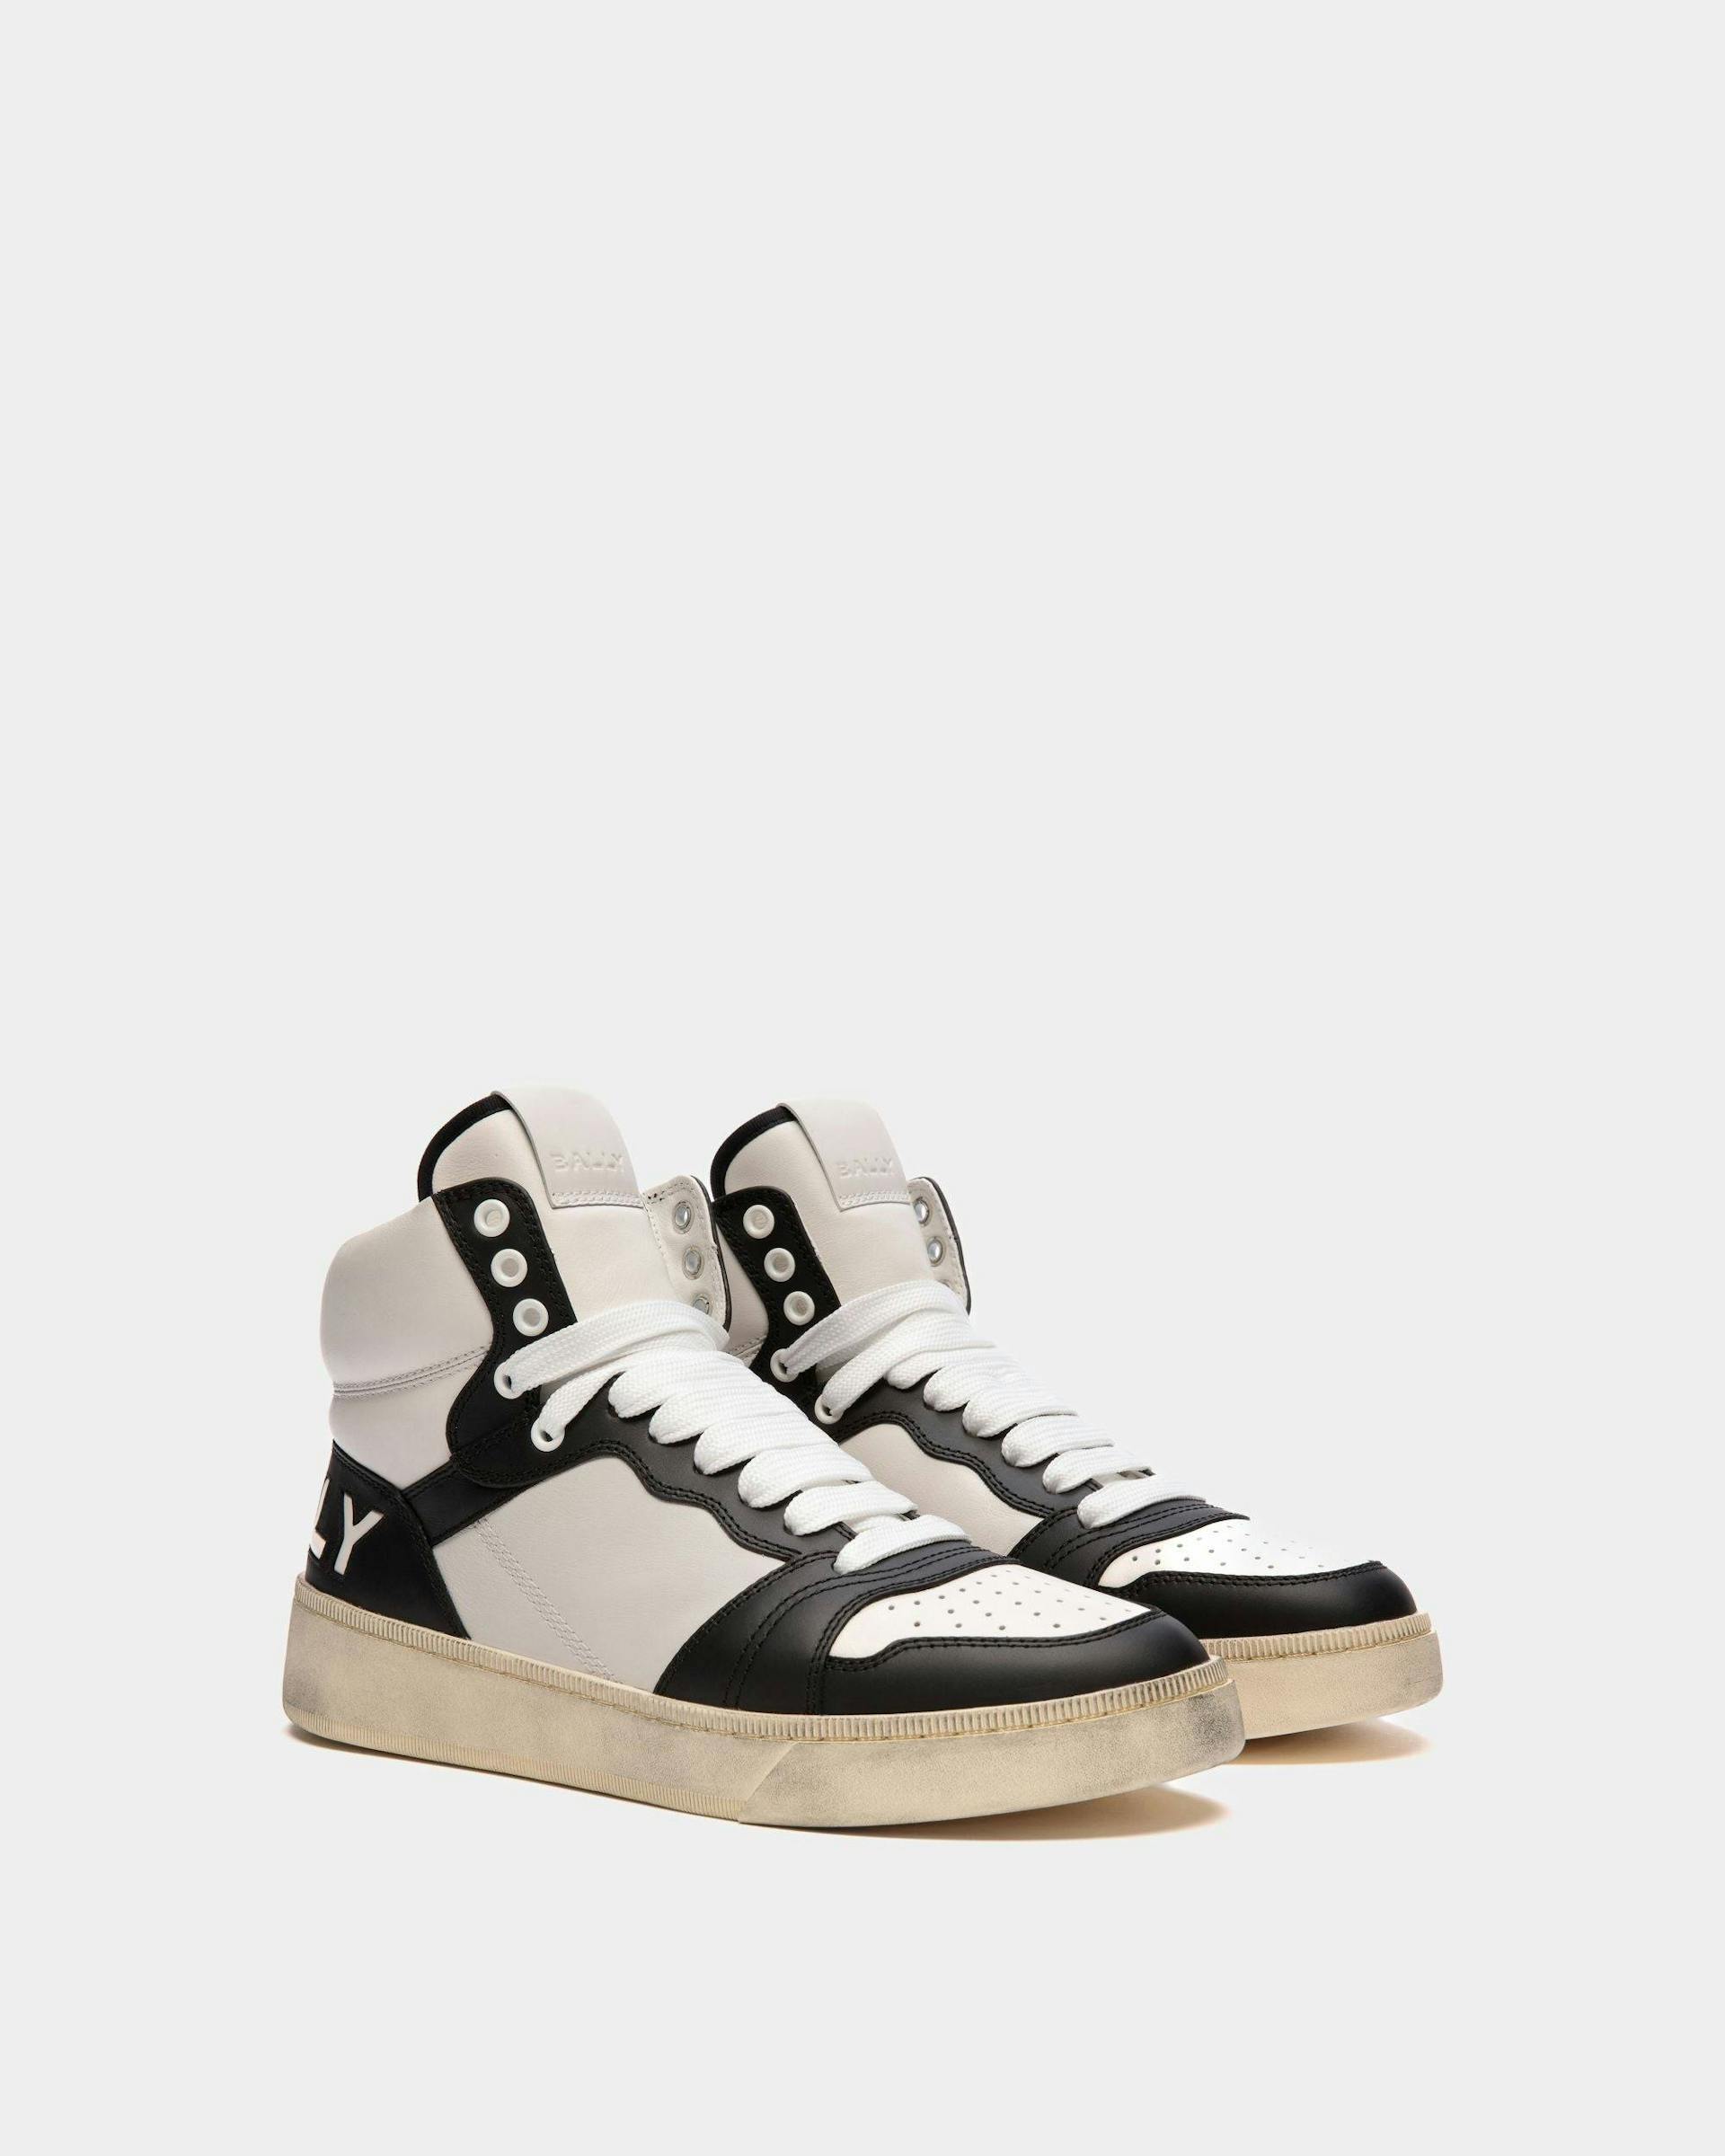 Men's Raise High-Top Sneaker in Black And White Leather | Bally | Still Life 3/4 Front